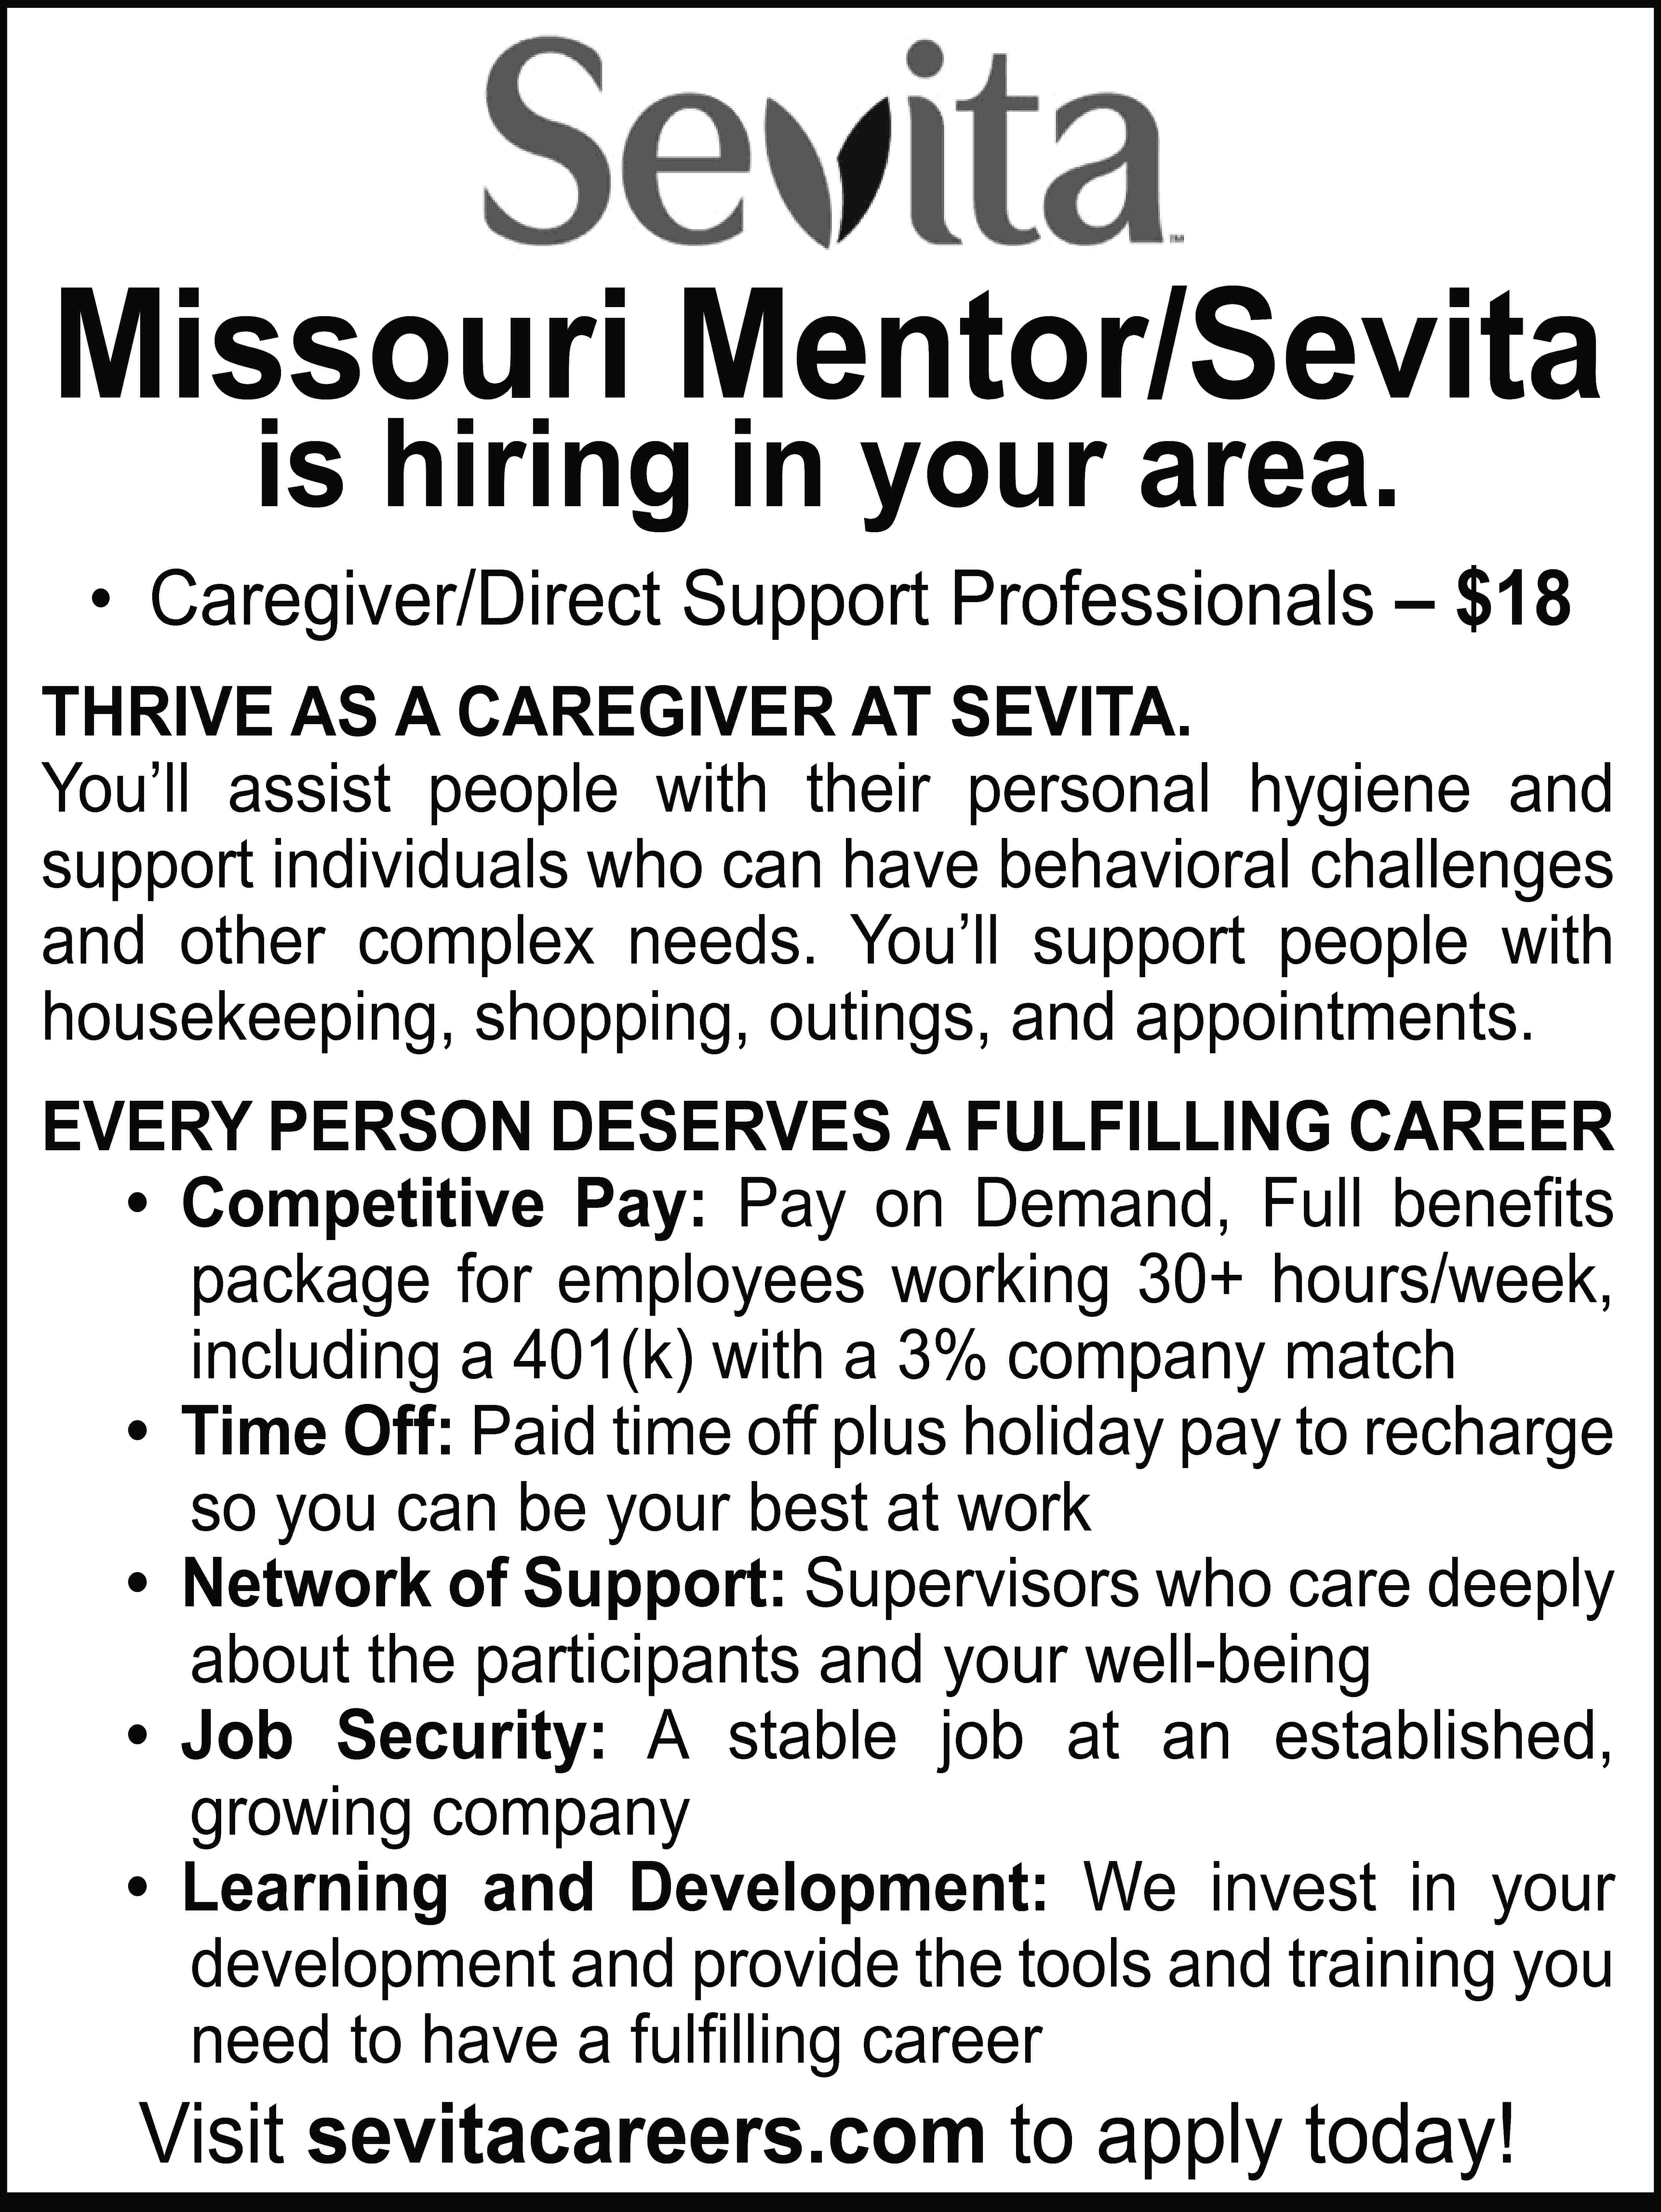 Missouri Mentor/Sevita is hiring in  Missouri Mentor/Sevita is hiring in your area. • Caregiver/Direct Support Professionals – $18 THRIVE AS A CAREGIVER AT SEVITA. You’ll assist people with their personal hygiene and support individuals who can have behavioral challenges and other complex needs. You’ll support people with housekeeping, shopping, outings, and appointments. EVERY PERSON DESERVES A FULFILLING CAREER • Competitive Pay: Pay on Demand, Full benefits package for employees working 30+ hours/week, including a 401(k) with a 3% company match • Time Off: Paid time off plus holiday pay to recharge so you can be your best at work • Network of Support: Supervisors who care deeply about the participants and your well-being • Job Security: A stable job at an established, growing company • Learning and Development: We invest in your development and provide the tools and training you need to have a fulfilling career Visit sevitacareers.com to apply today!